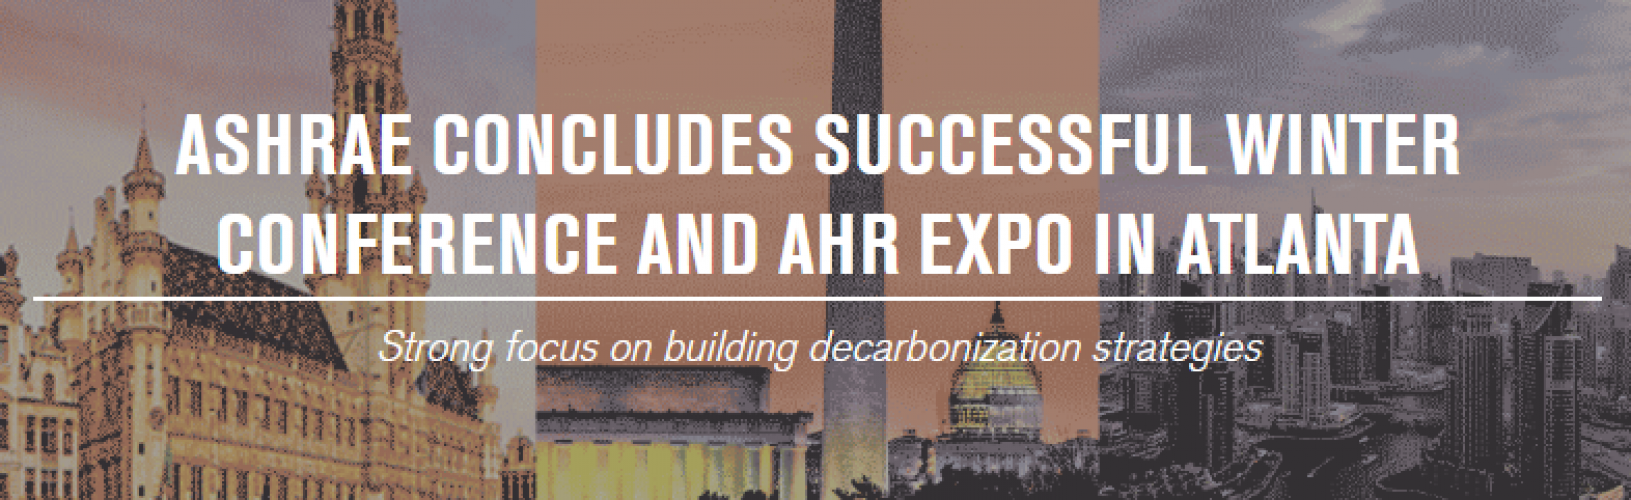 ASHRAE Concludes Successful Winter Conference and AHR Expo in Atlanta